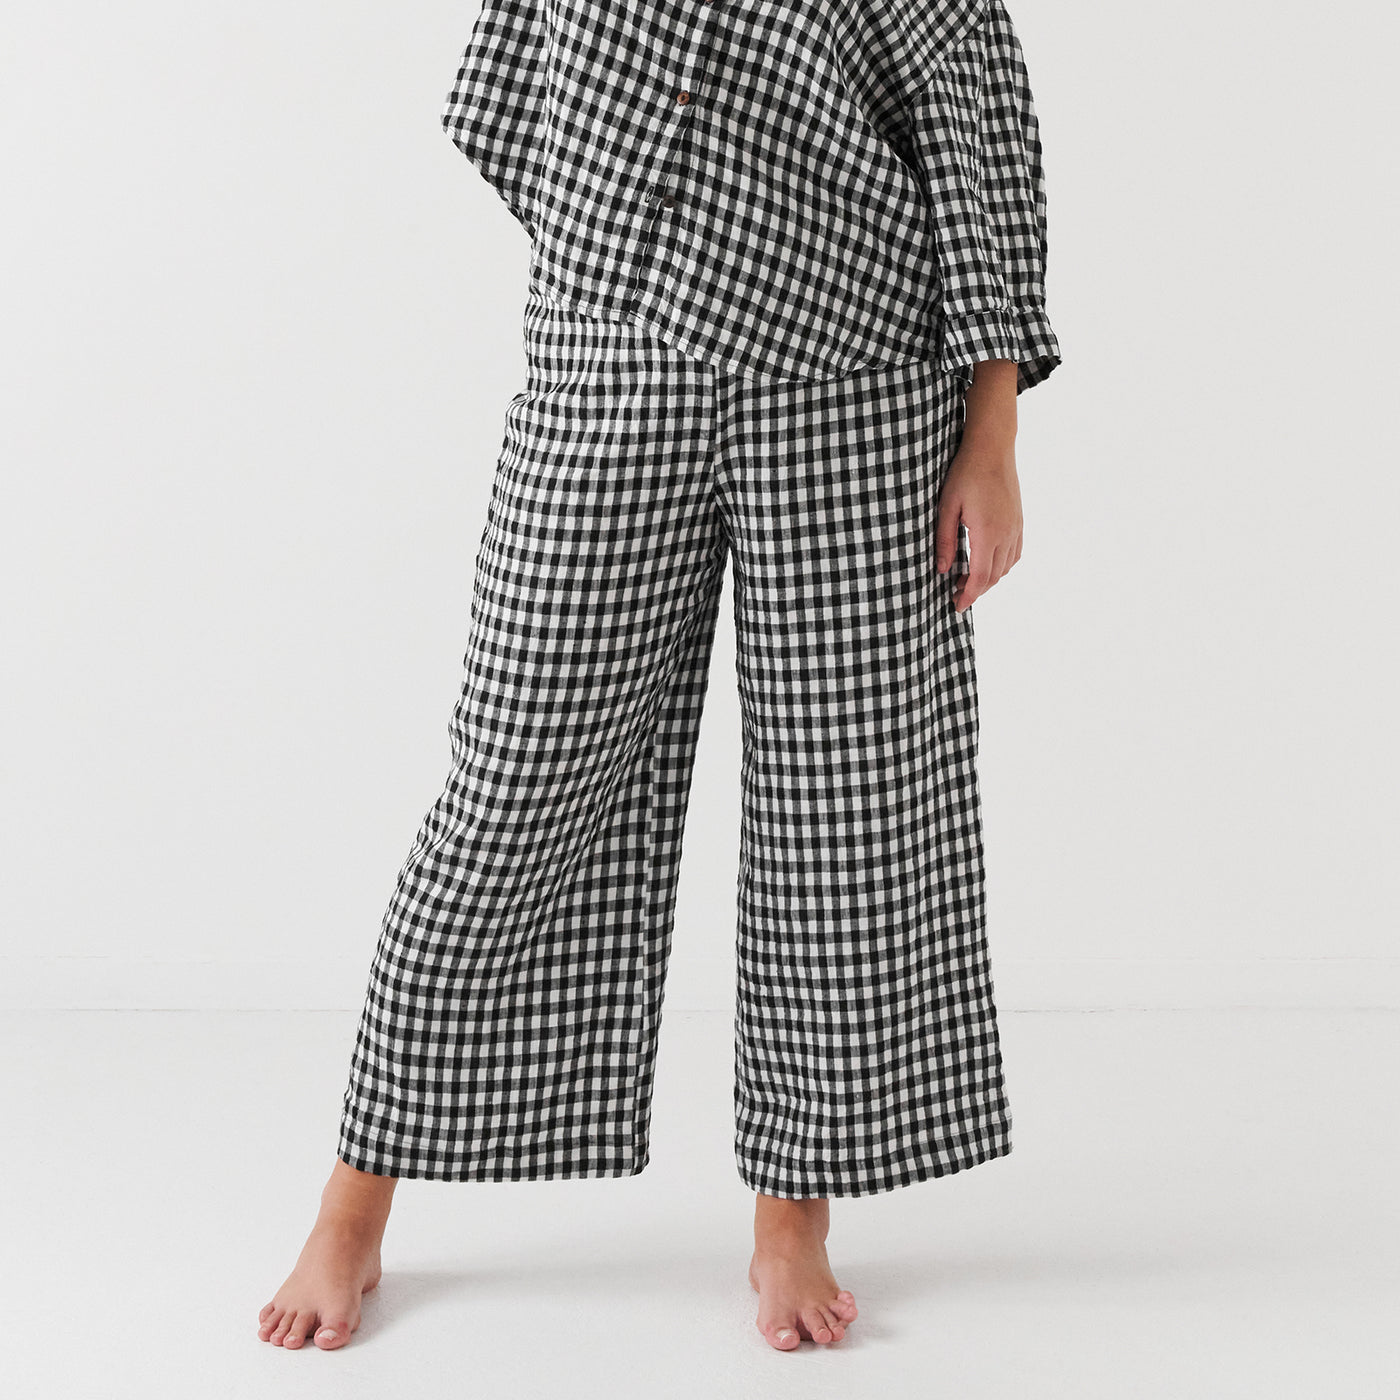 French Flax Linen Lounge Pant in Charcoal Gingham